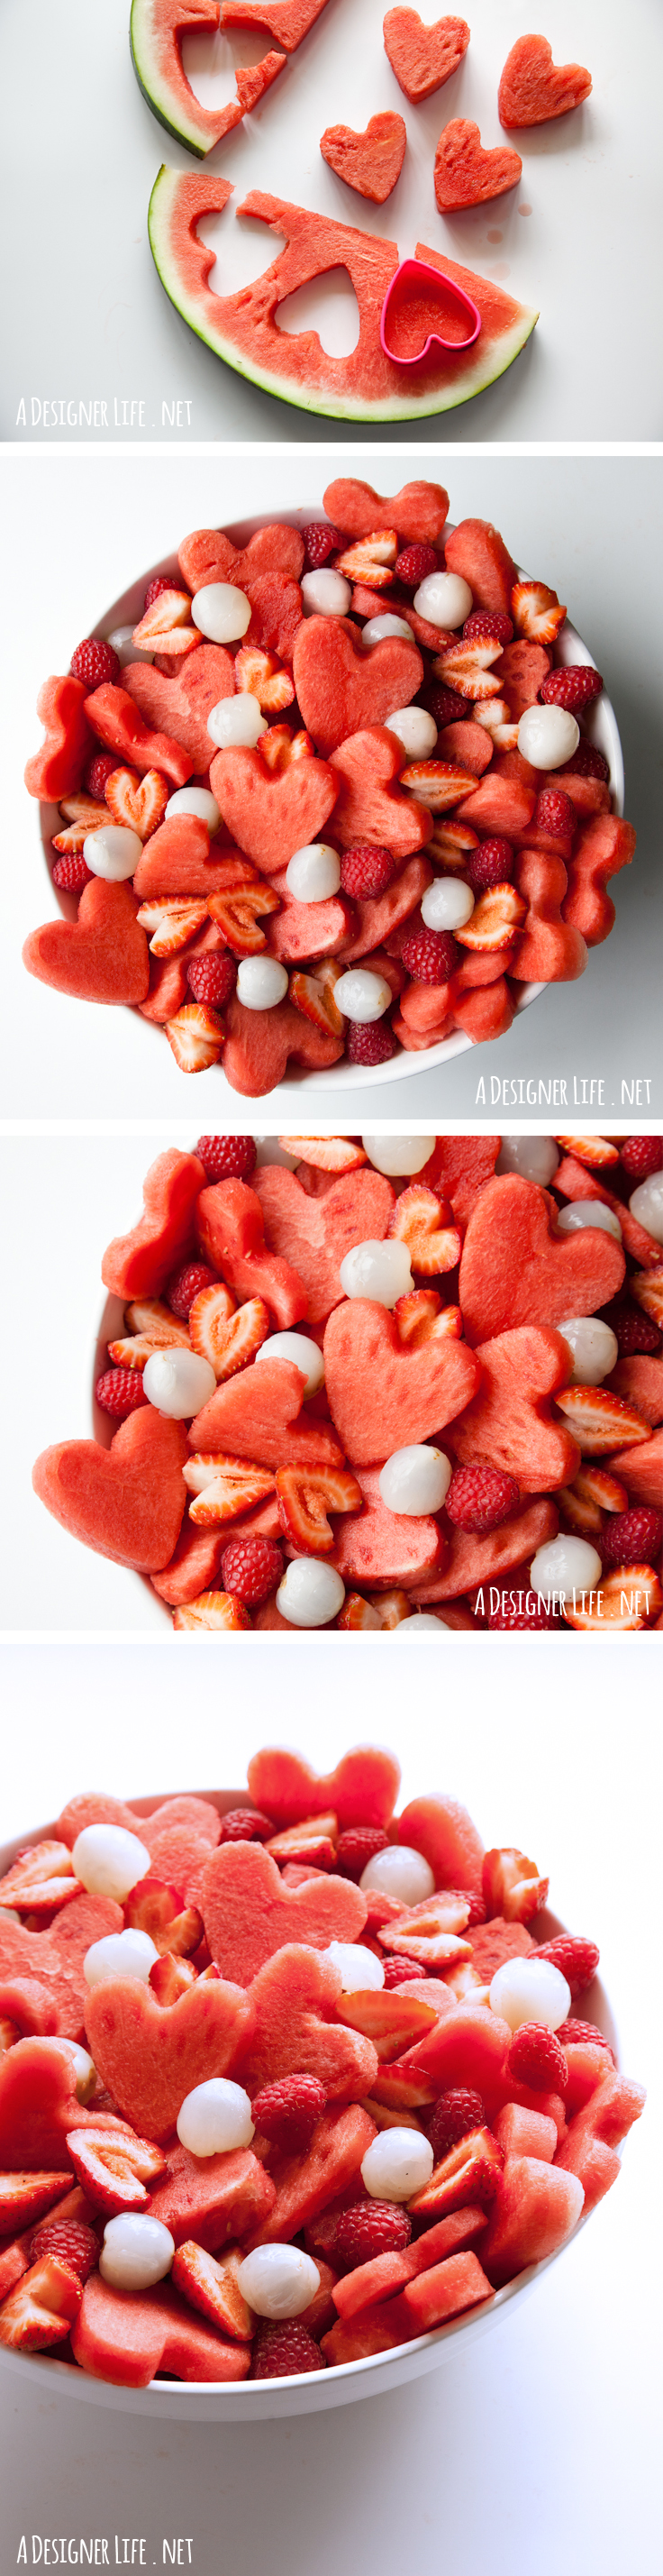 Watermelon heart fruit salad for Valentine's Day - made with a heart-shaped cookie cutter!